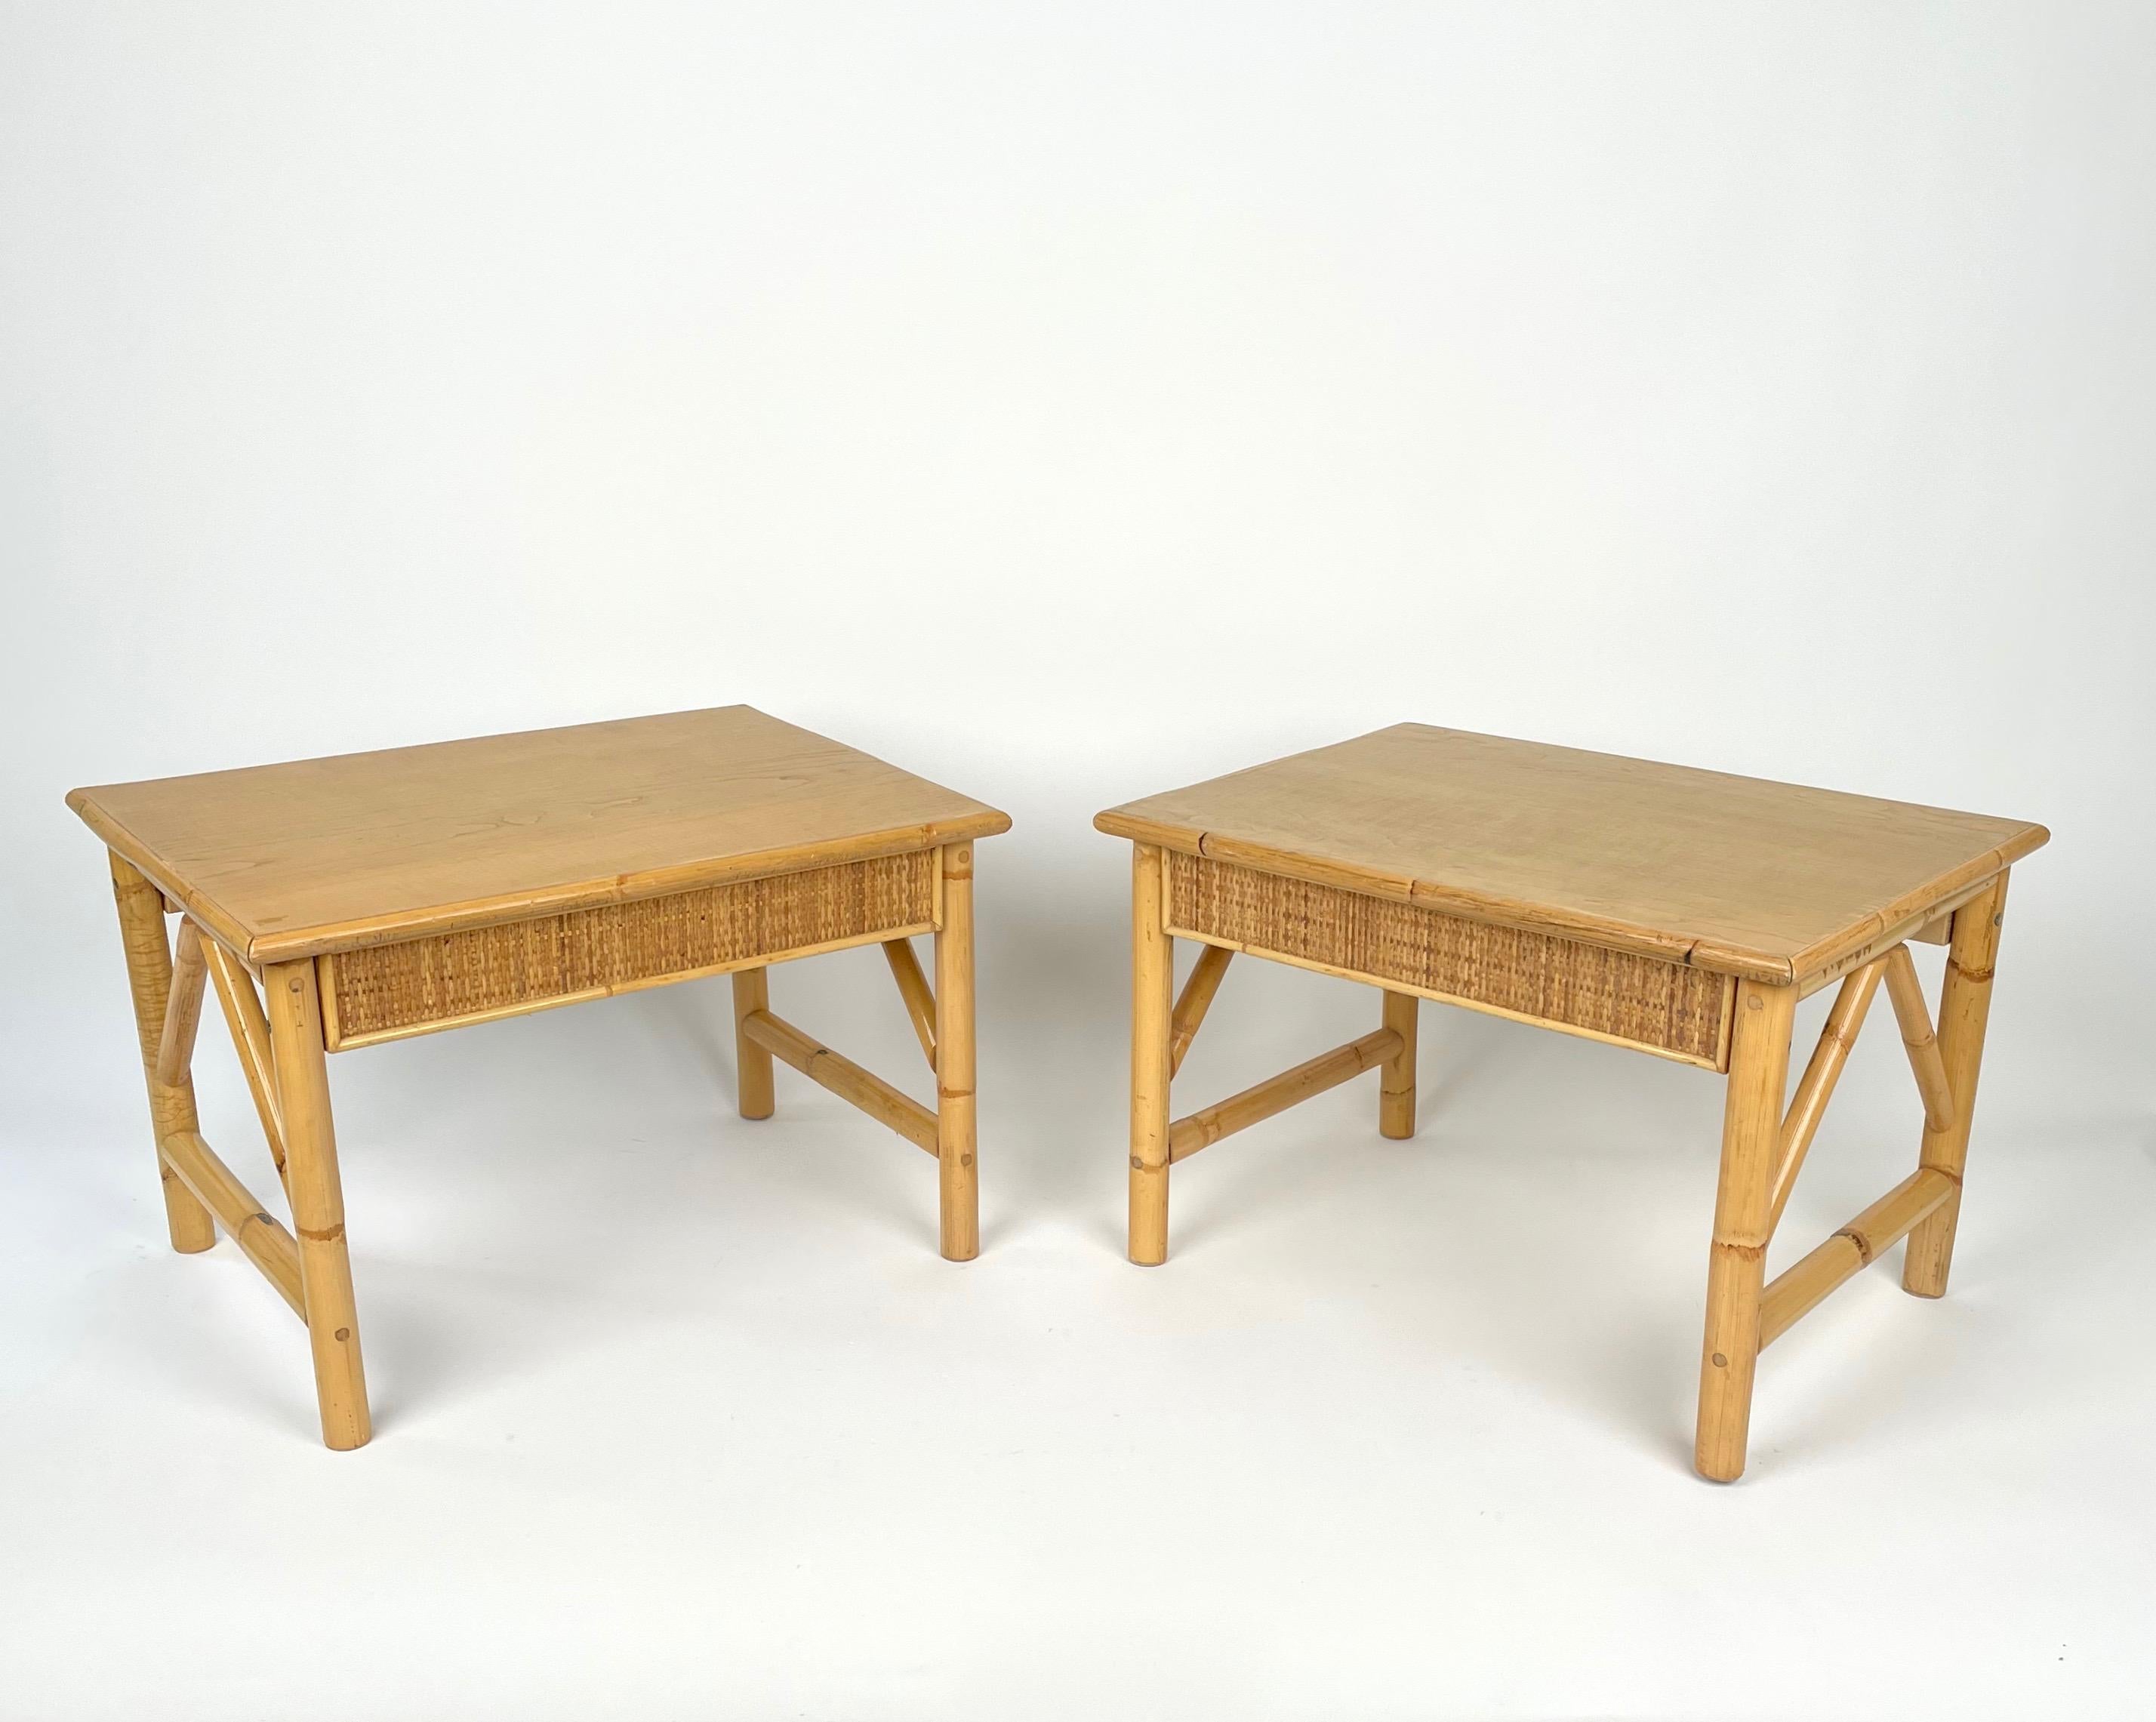 Pair of side tables in bamboo, rattan and wood.

Made in Italy in the 1980s.